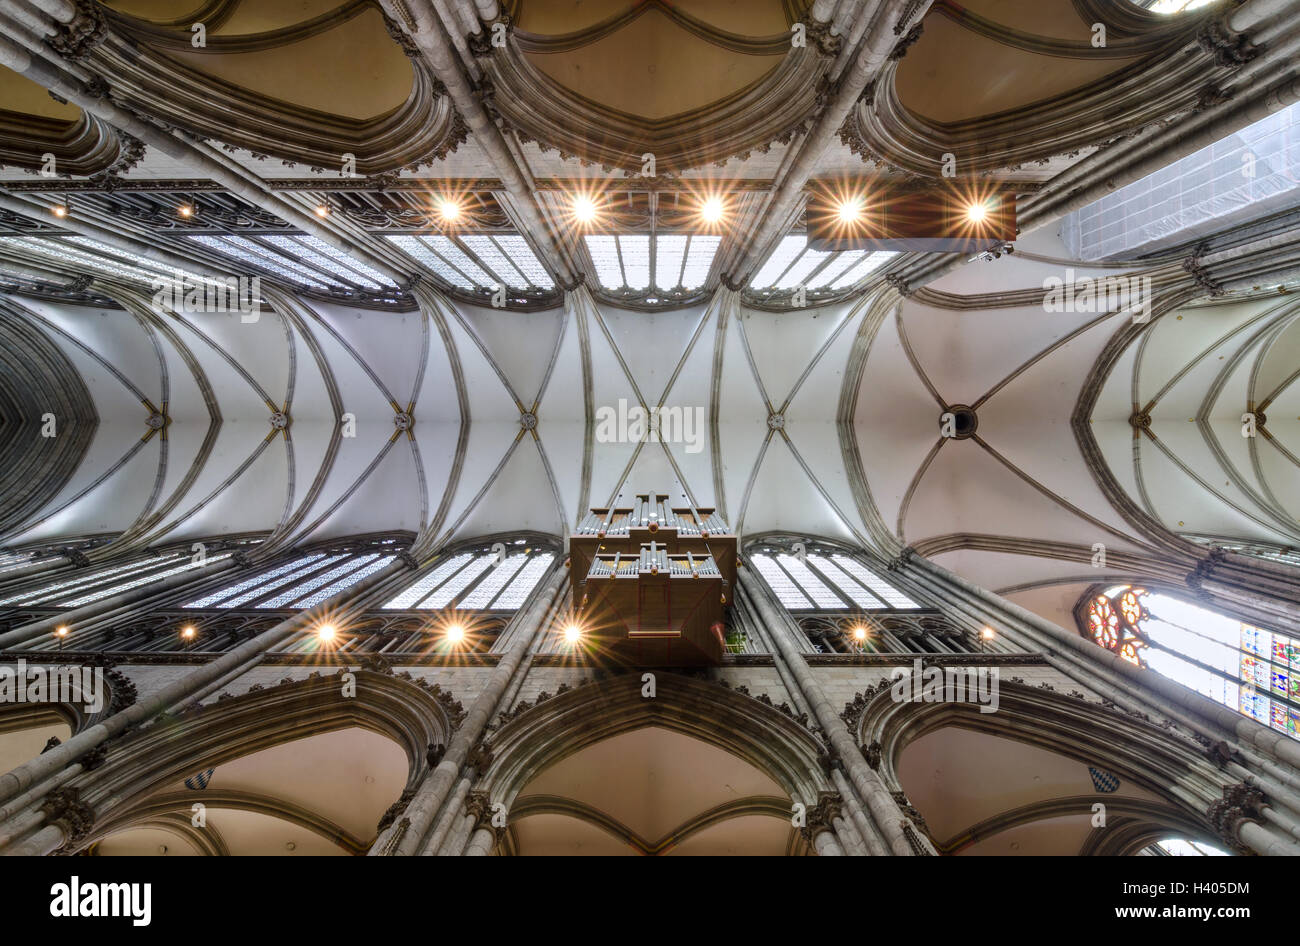 COLOGNE, GERMANY - SEP 17, 2015: Ceiling of the Cologne Cathedral. Roman Catholic cathedral. Stock Photo